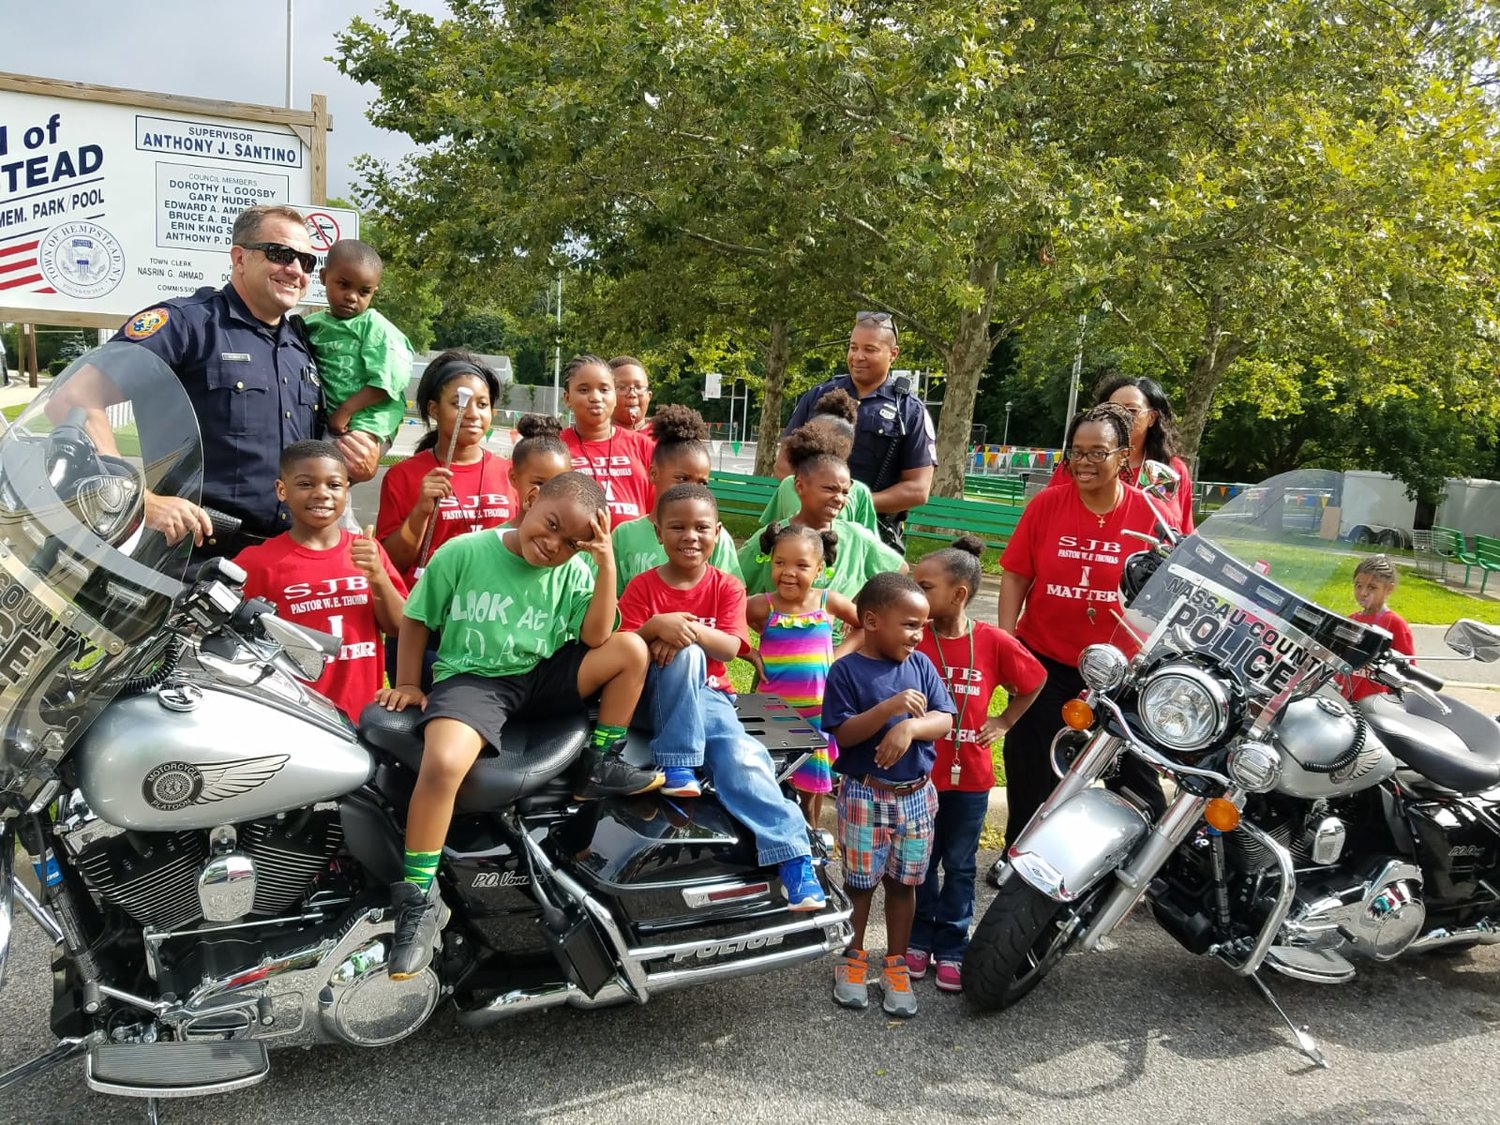 Two officers of the Lakeview Police Department with their motorcycles and community members at the 2021 Lakeview Day.